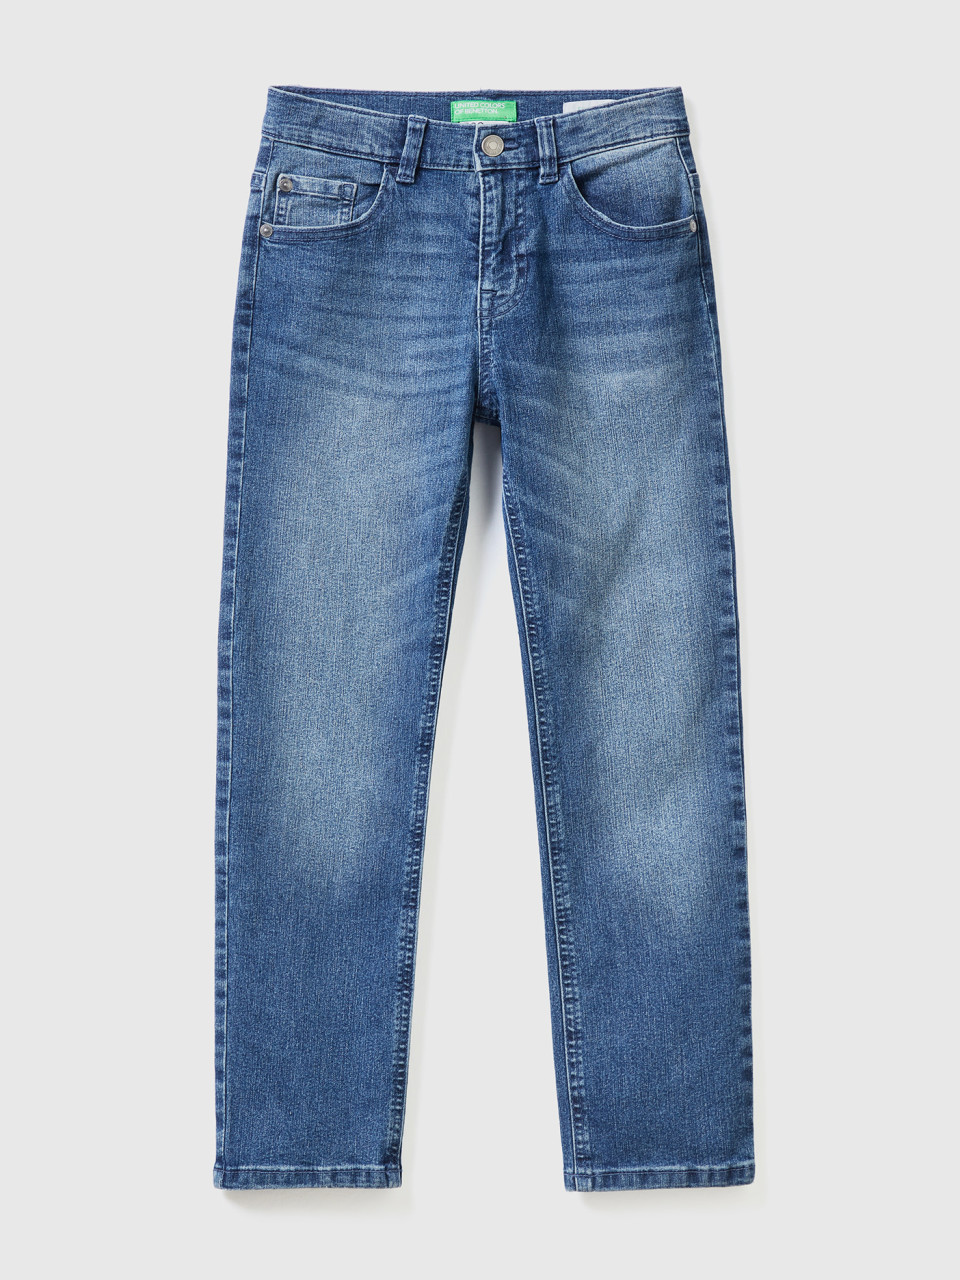 Benetton, Jeans Slim Fit eco-recycle, Blu Scuro, Bambini